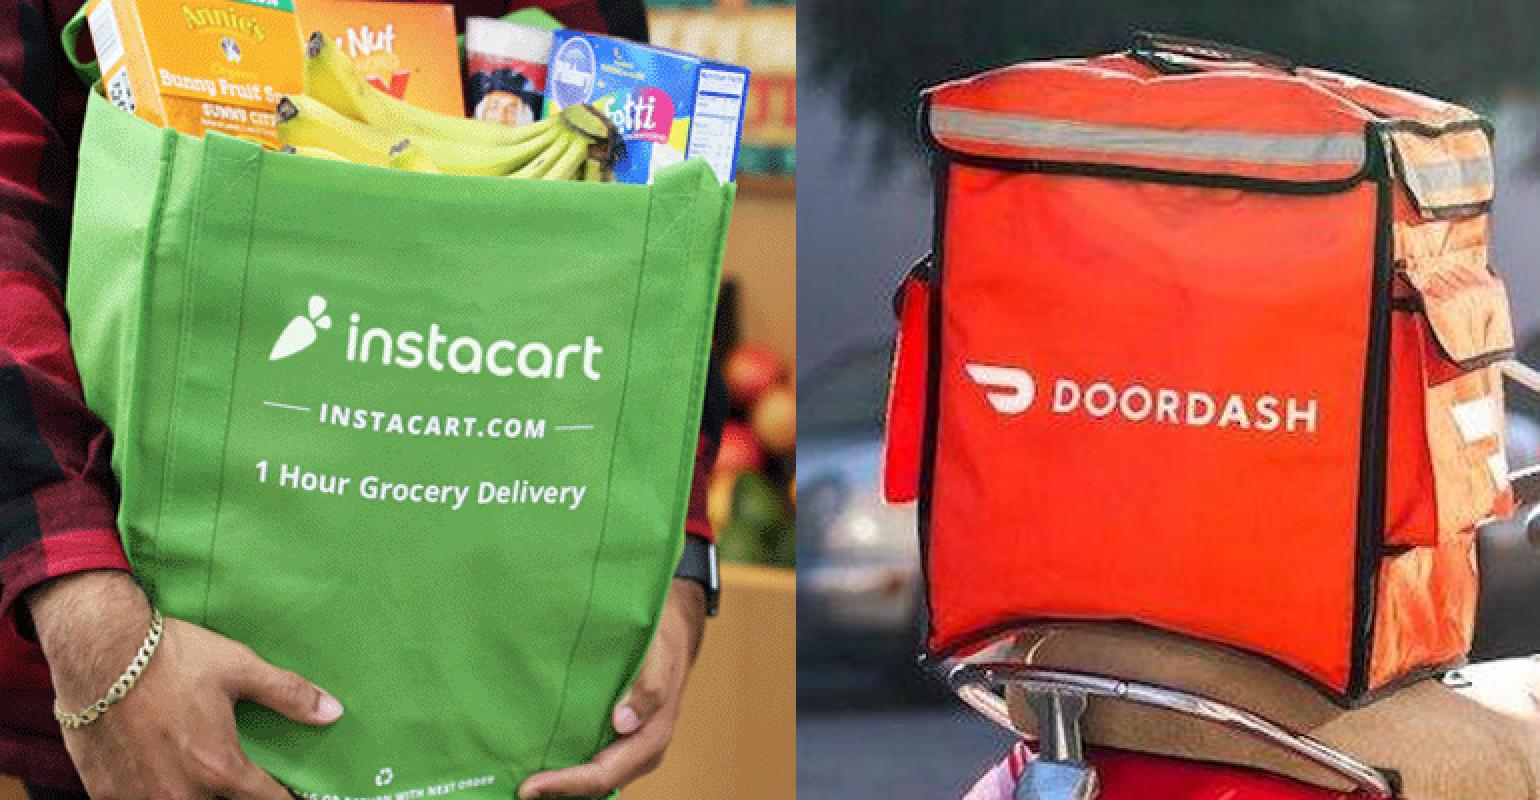 Bristol Farms Rolls Out On-Demand Grocery Delivery via DoorDash